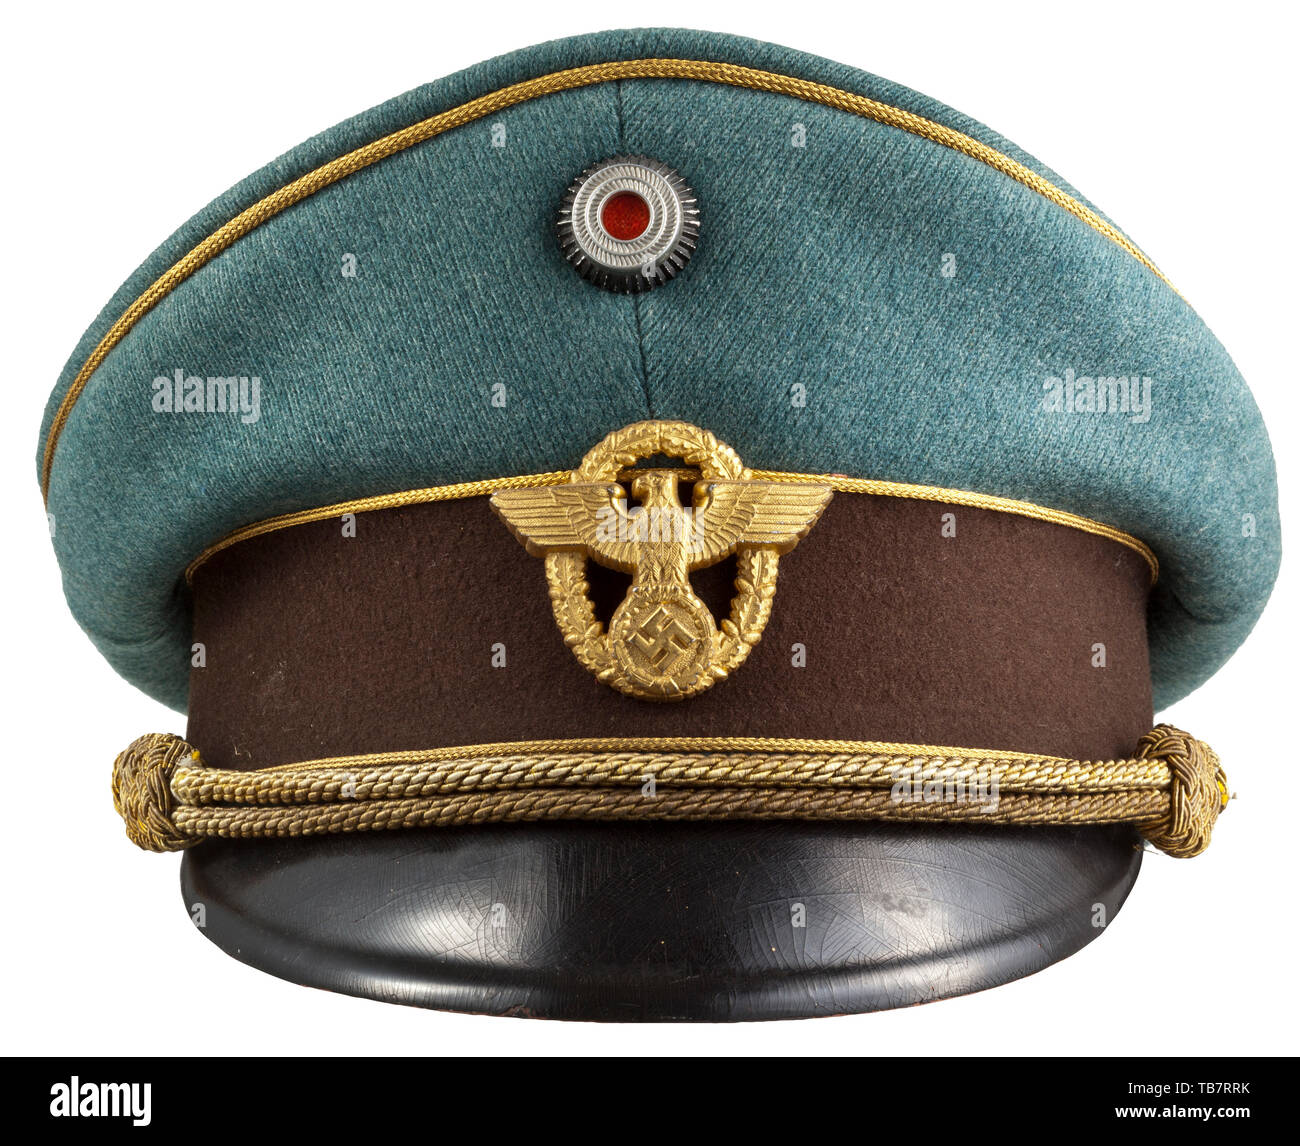 A visor cap for generals of the police, Made of fine police-green gabardine  cloth, dark brown trim band, gold piping. Golden-yellow silk lining (cap  trapezoid is missing), the light brown leather sweatband